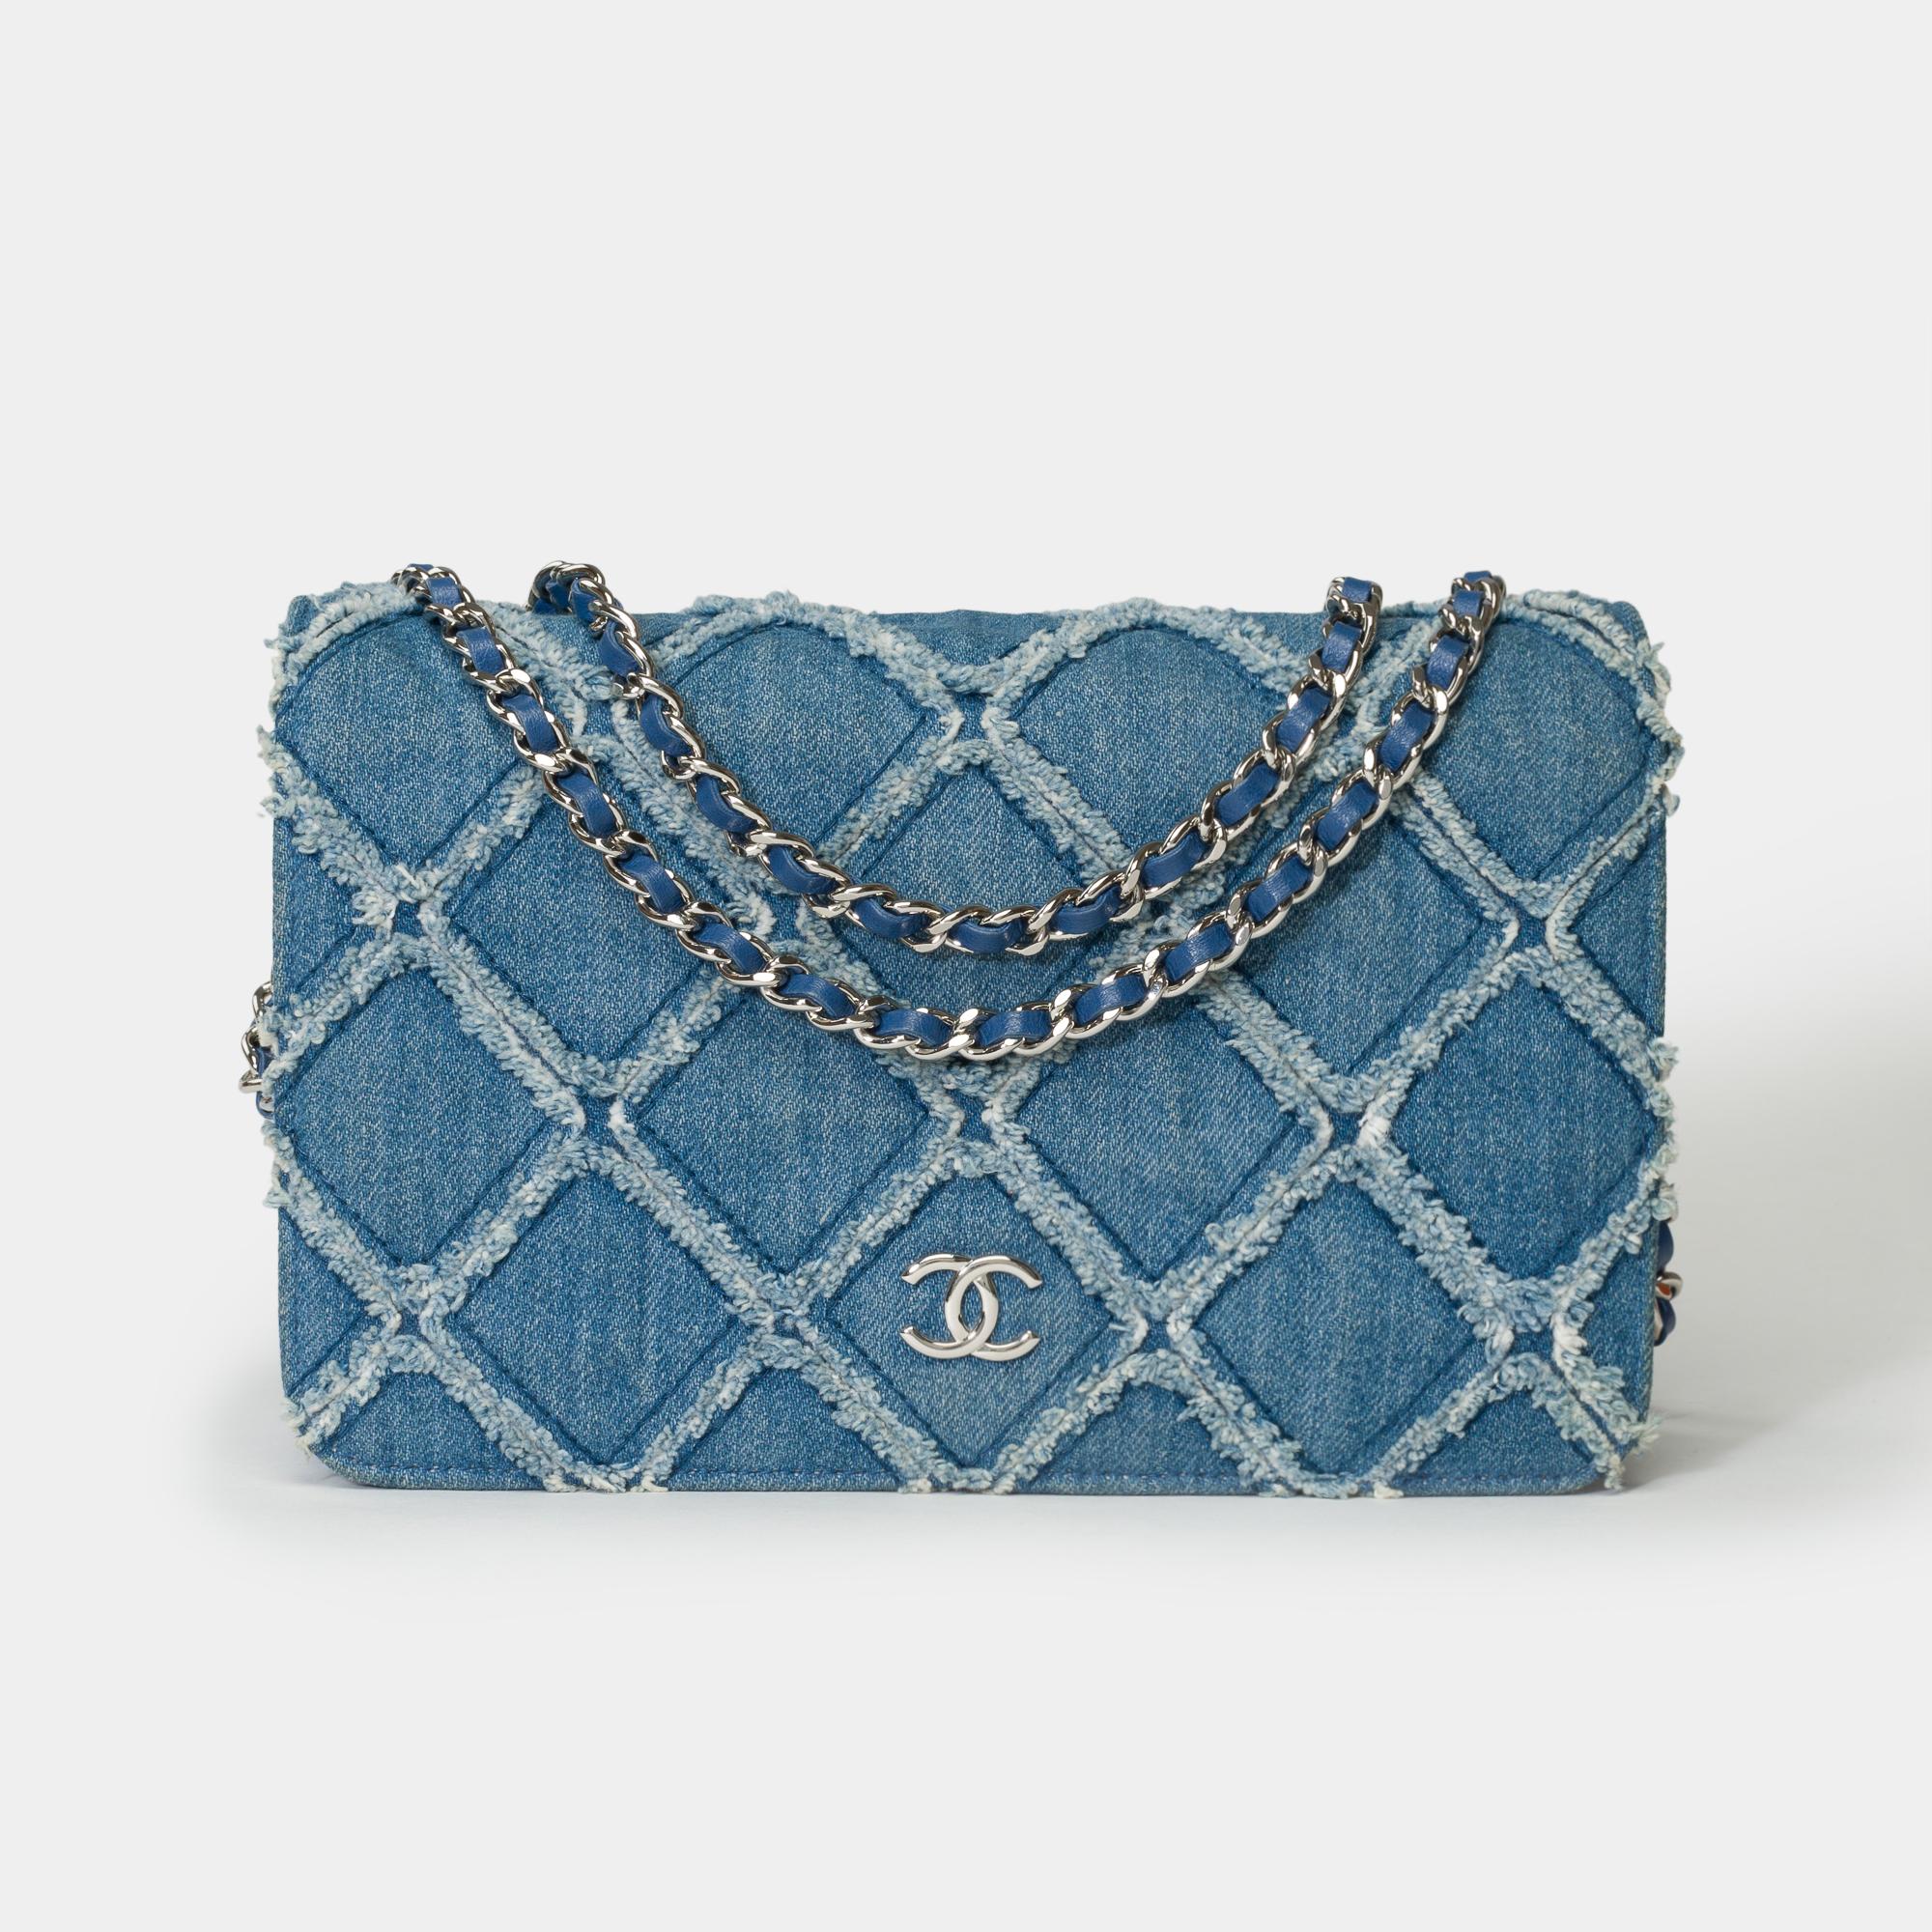 Exceptional​ ​&​ ​Rare​ ​Chanel​ ​Wallet​ ​On​ ​Chain​ ​(WOC)​ ​shoulder​ ​bag​ ​in​ ​blue​ ​denim​ ​with​ ​cross​ ​straps,​ ​silver​ ​metal​ ​trim,​ ​a​ ​shoulder​ ​strap​ ​in​ ​silver​ ​metal​ ​interlaced​ ​with​ ​blue​ ​leather​ ​allowing​ ​a​